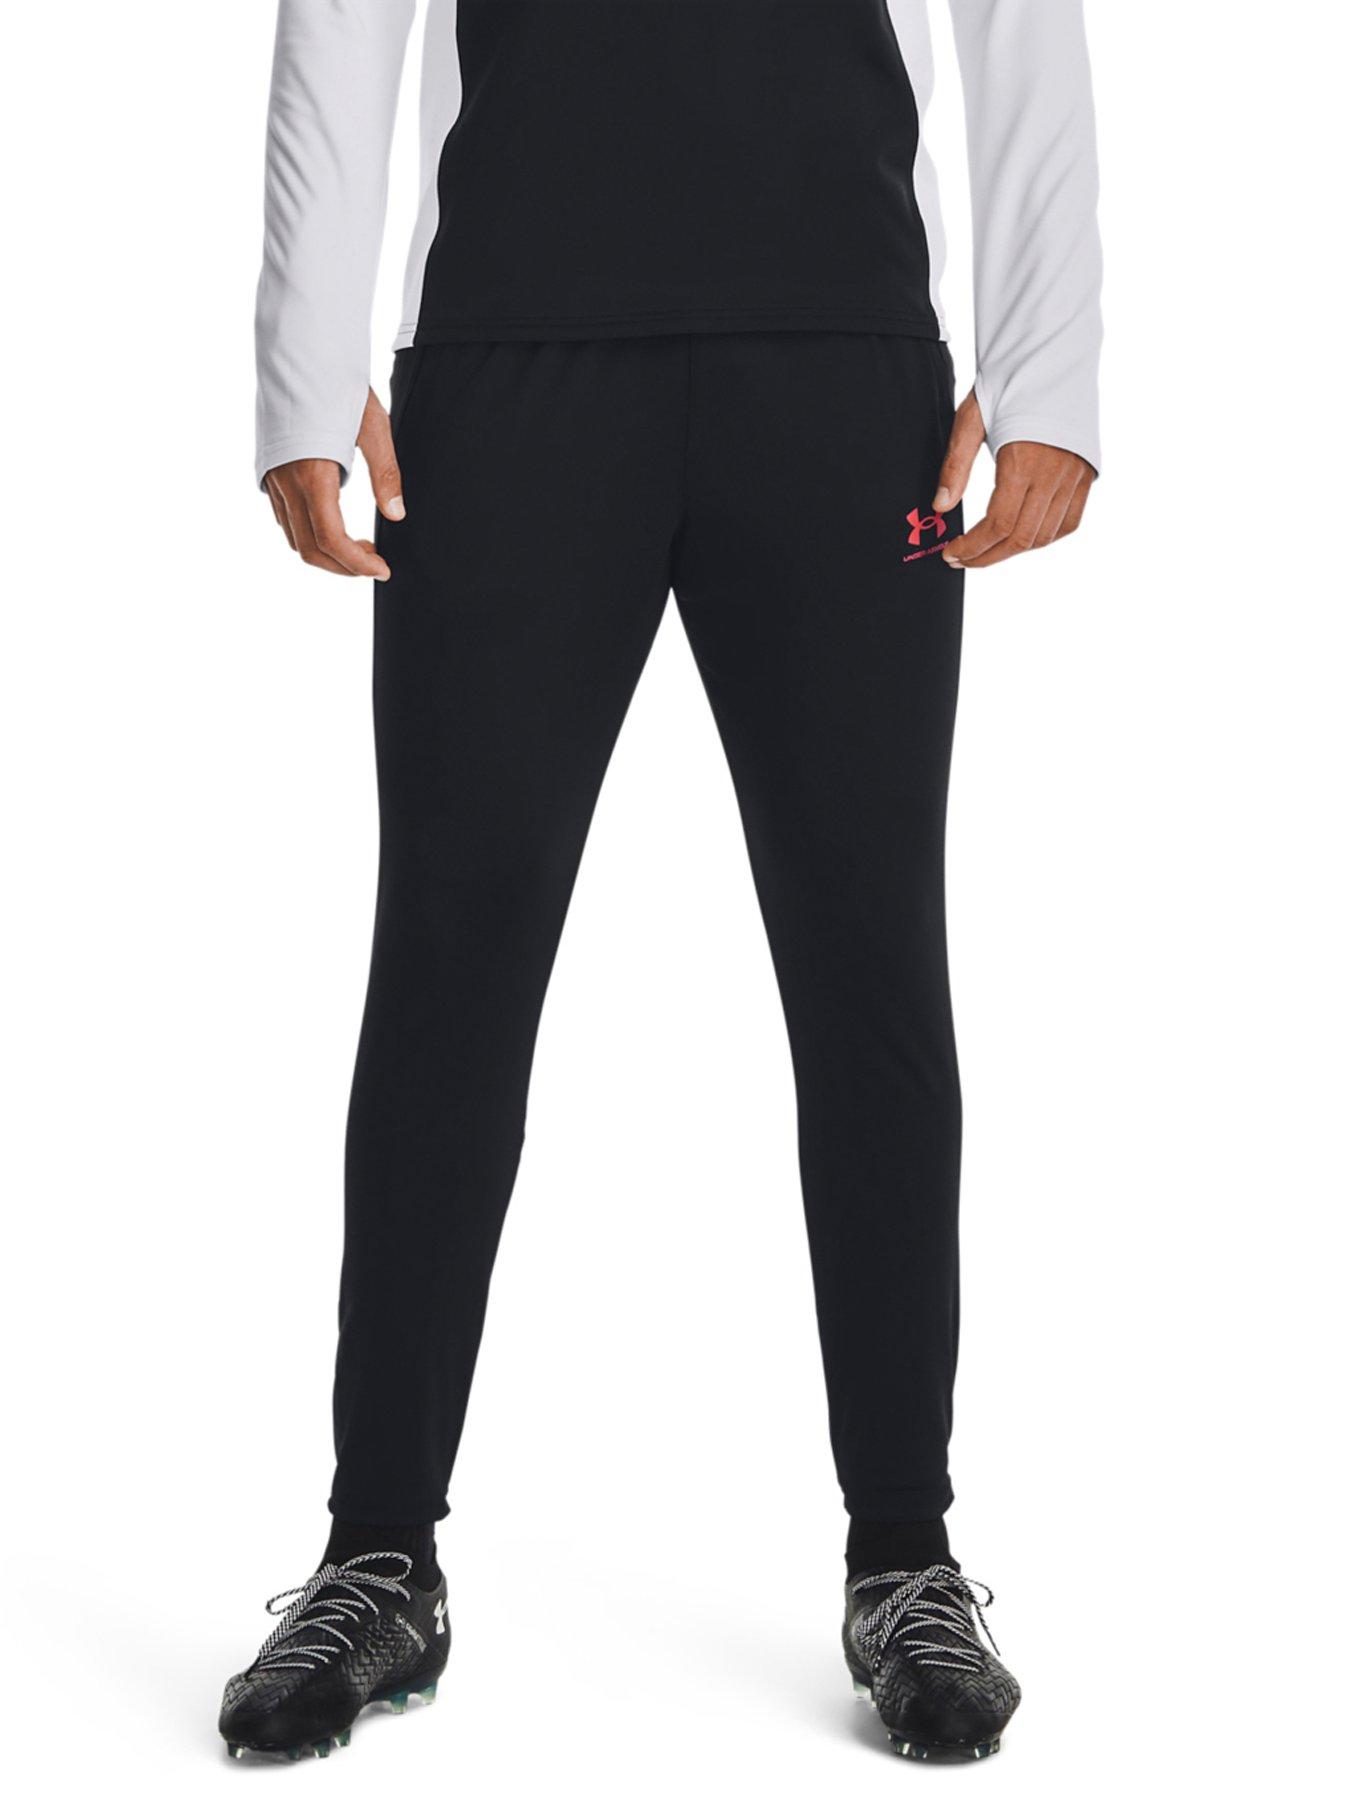 Under Armour Challenger Training Pant Granite / White - Free delivery